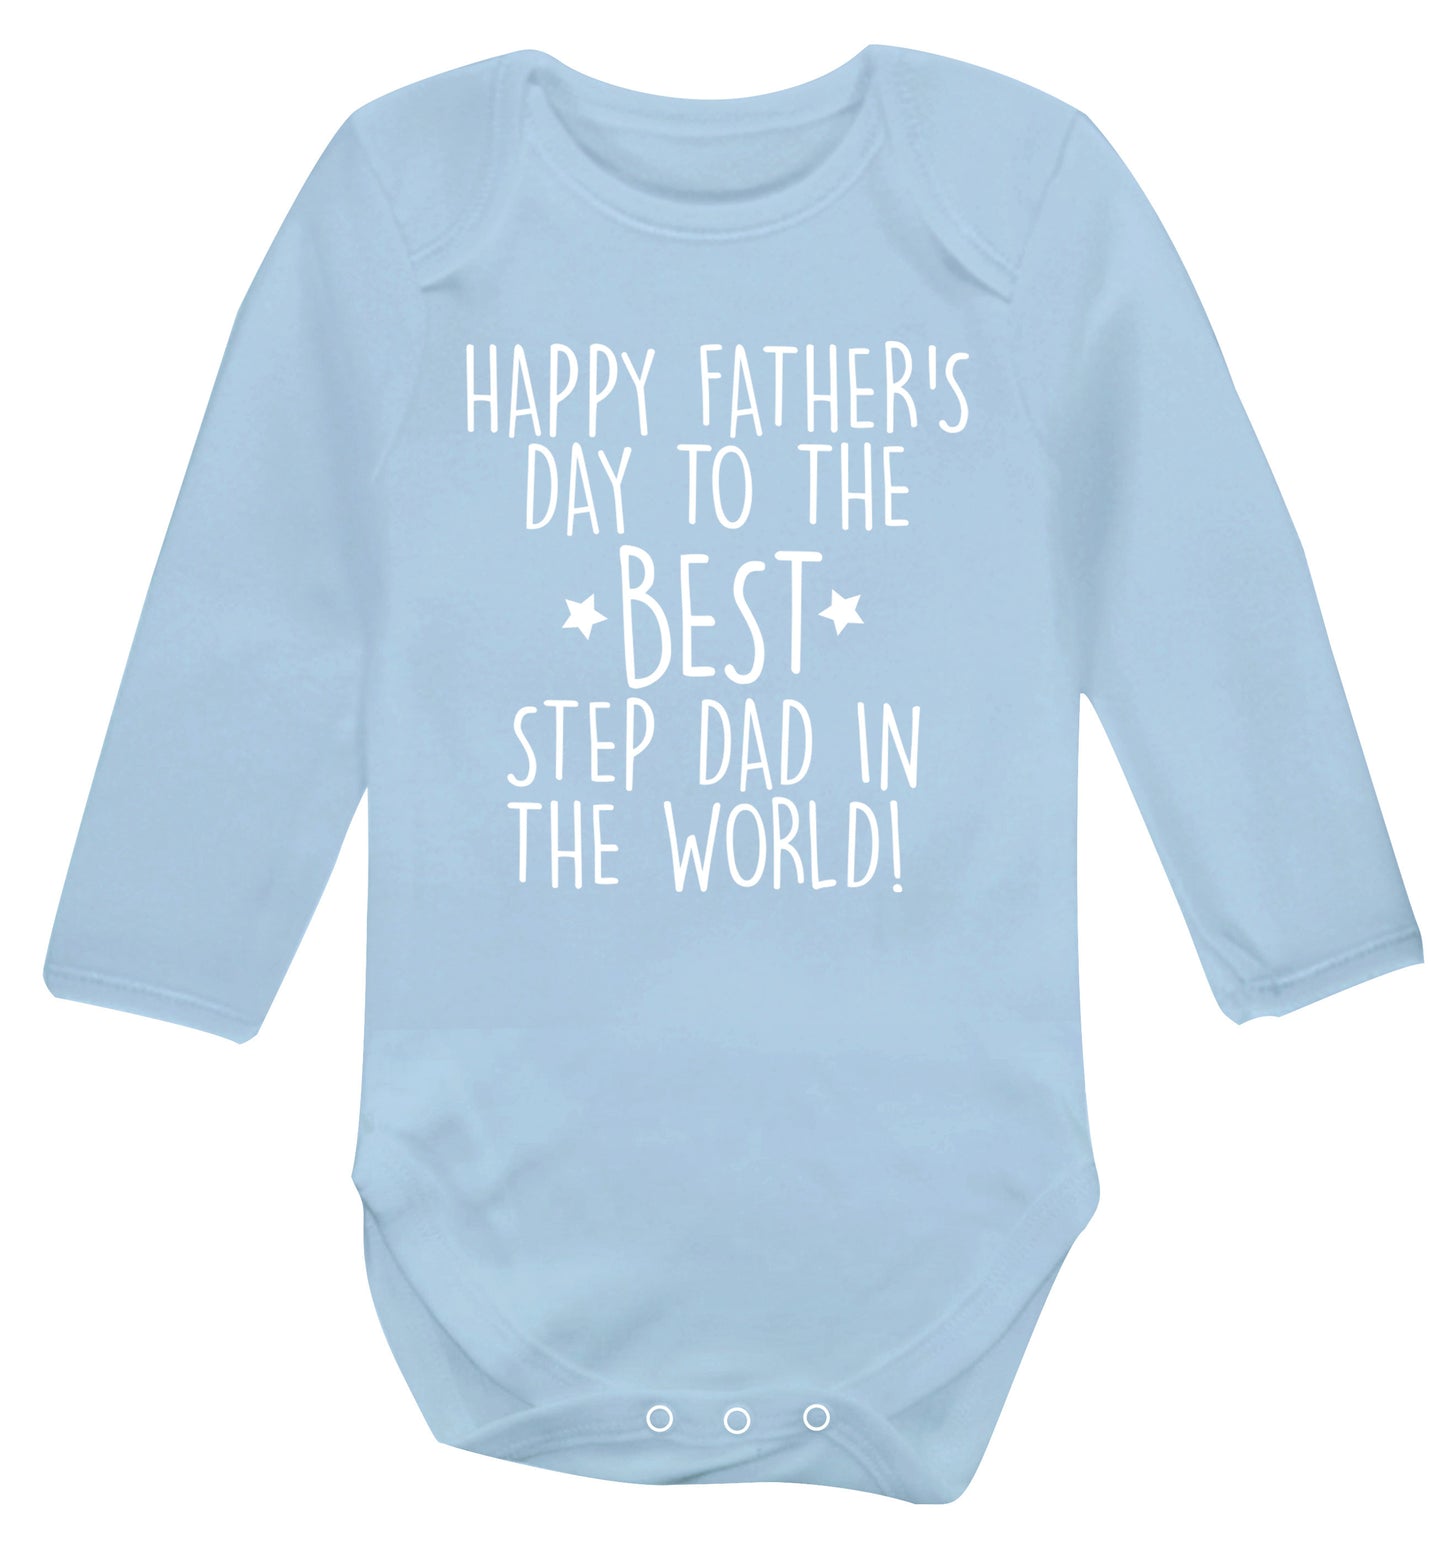 Happy Father's day to the best step dad in the world! Baby Vest long sleeved pale blue 6-12 months